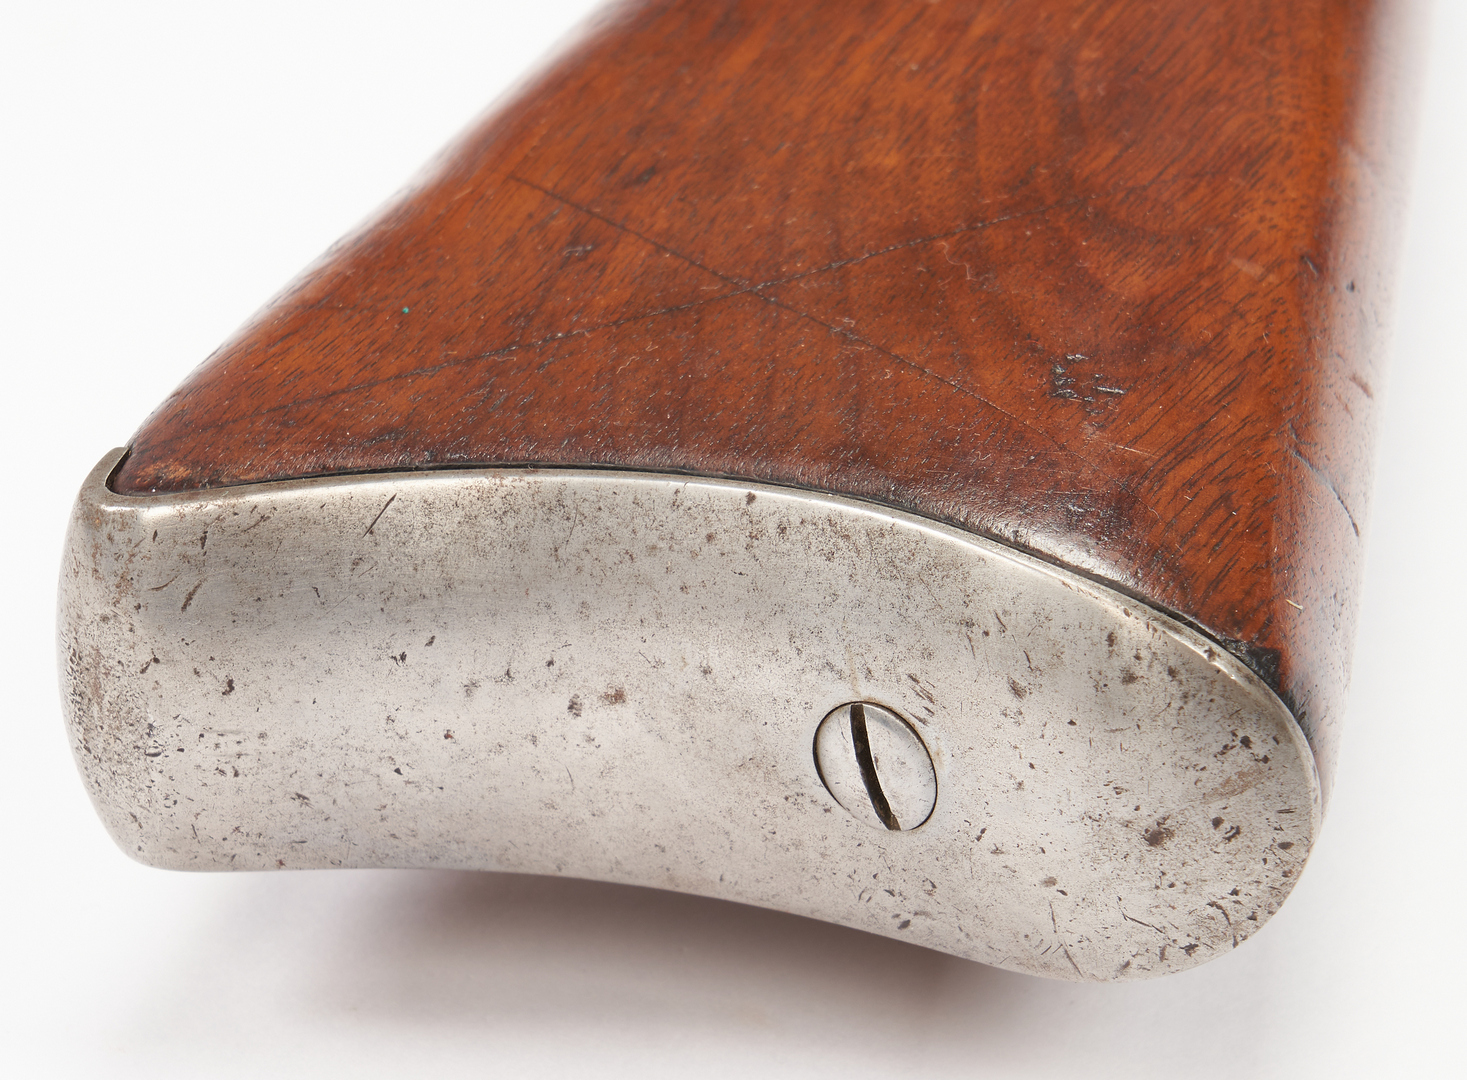 Lot 702: Norwich Arms Co. Contract M1861 Rifle-Musket, .58 cal.